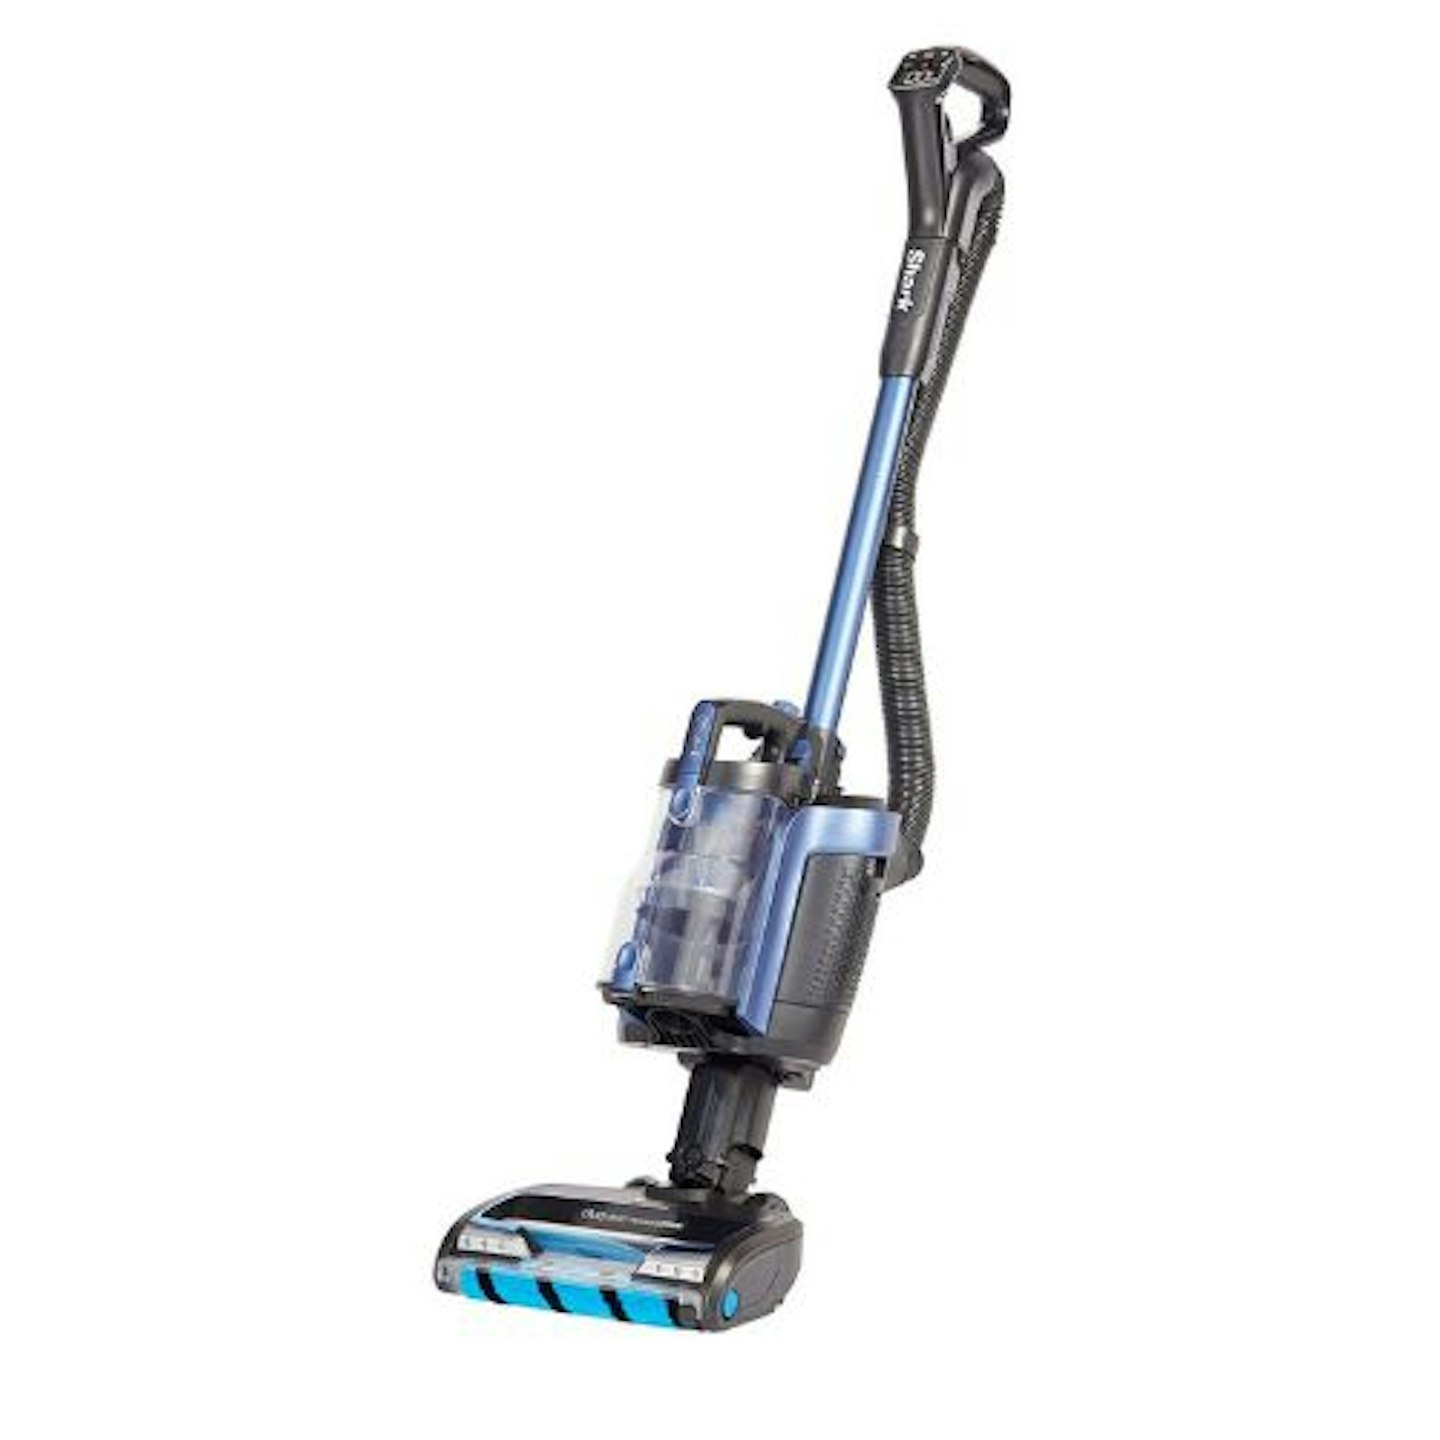 nti Hair Wrap Upright Cordless Vacuum Cleaner with PowerFins